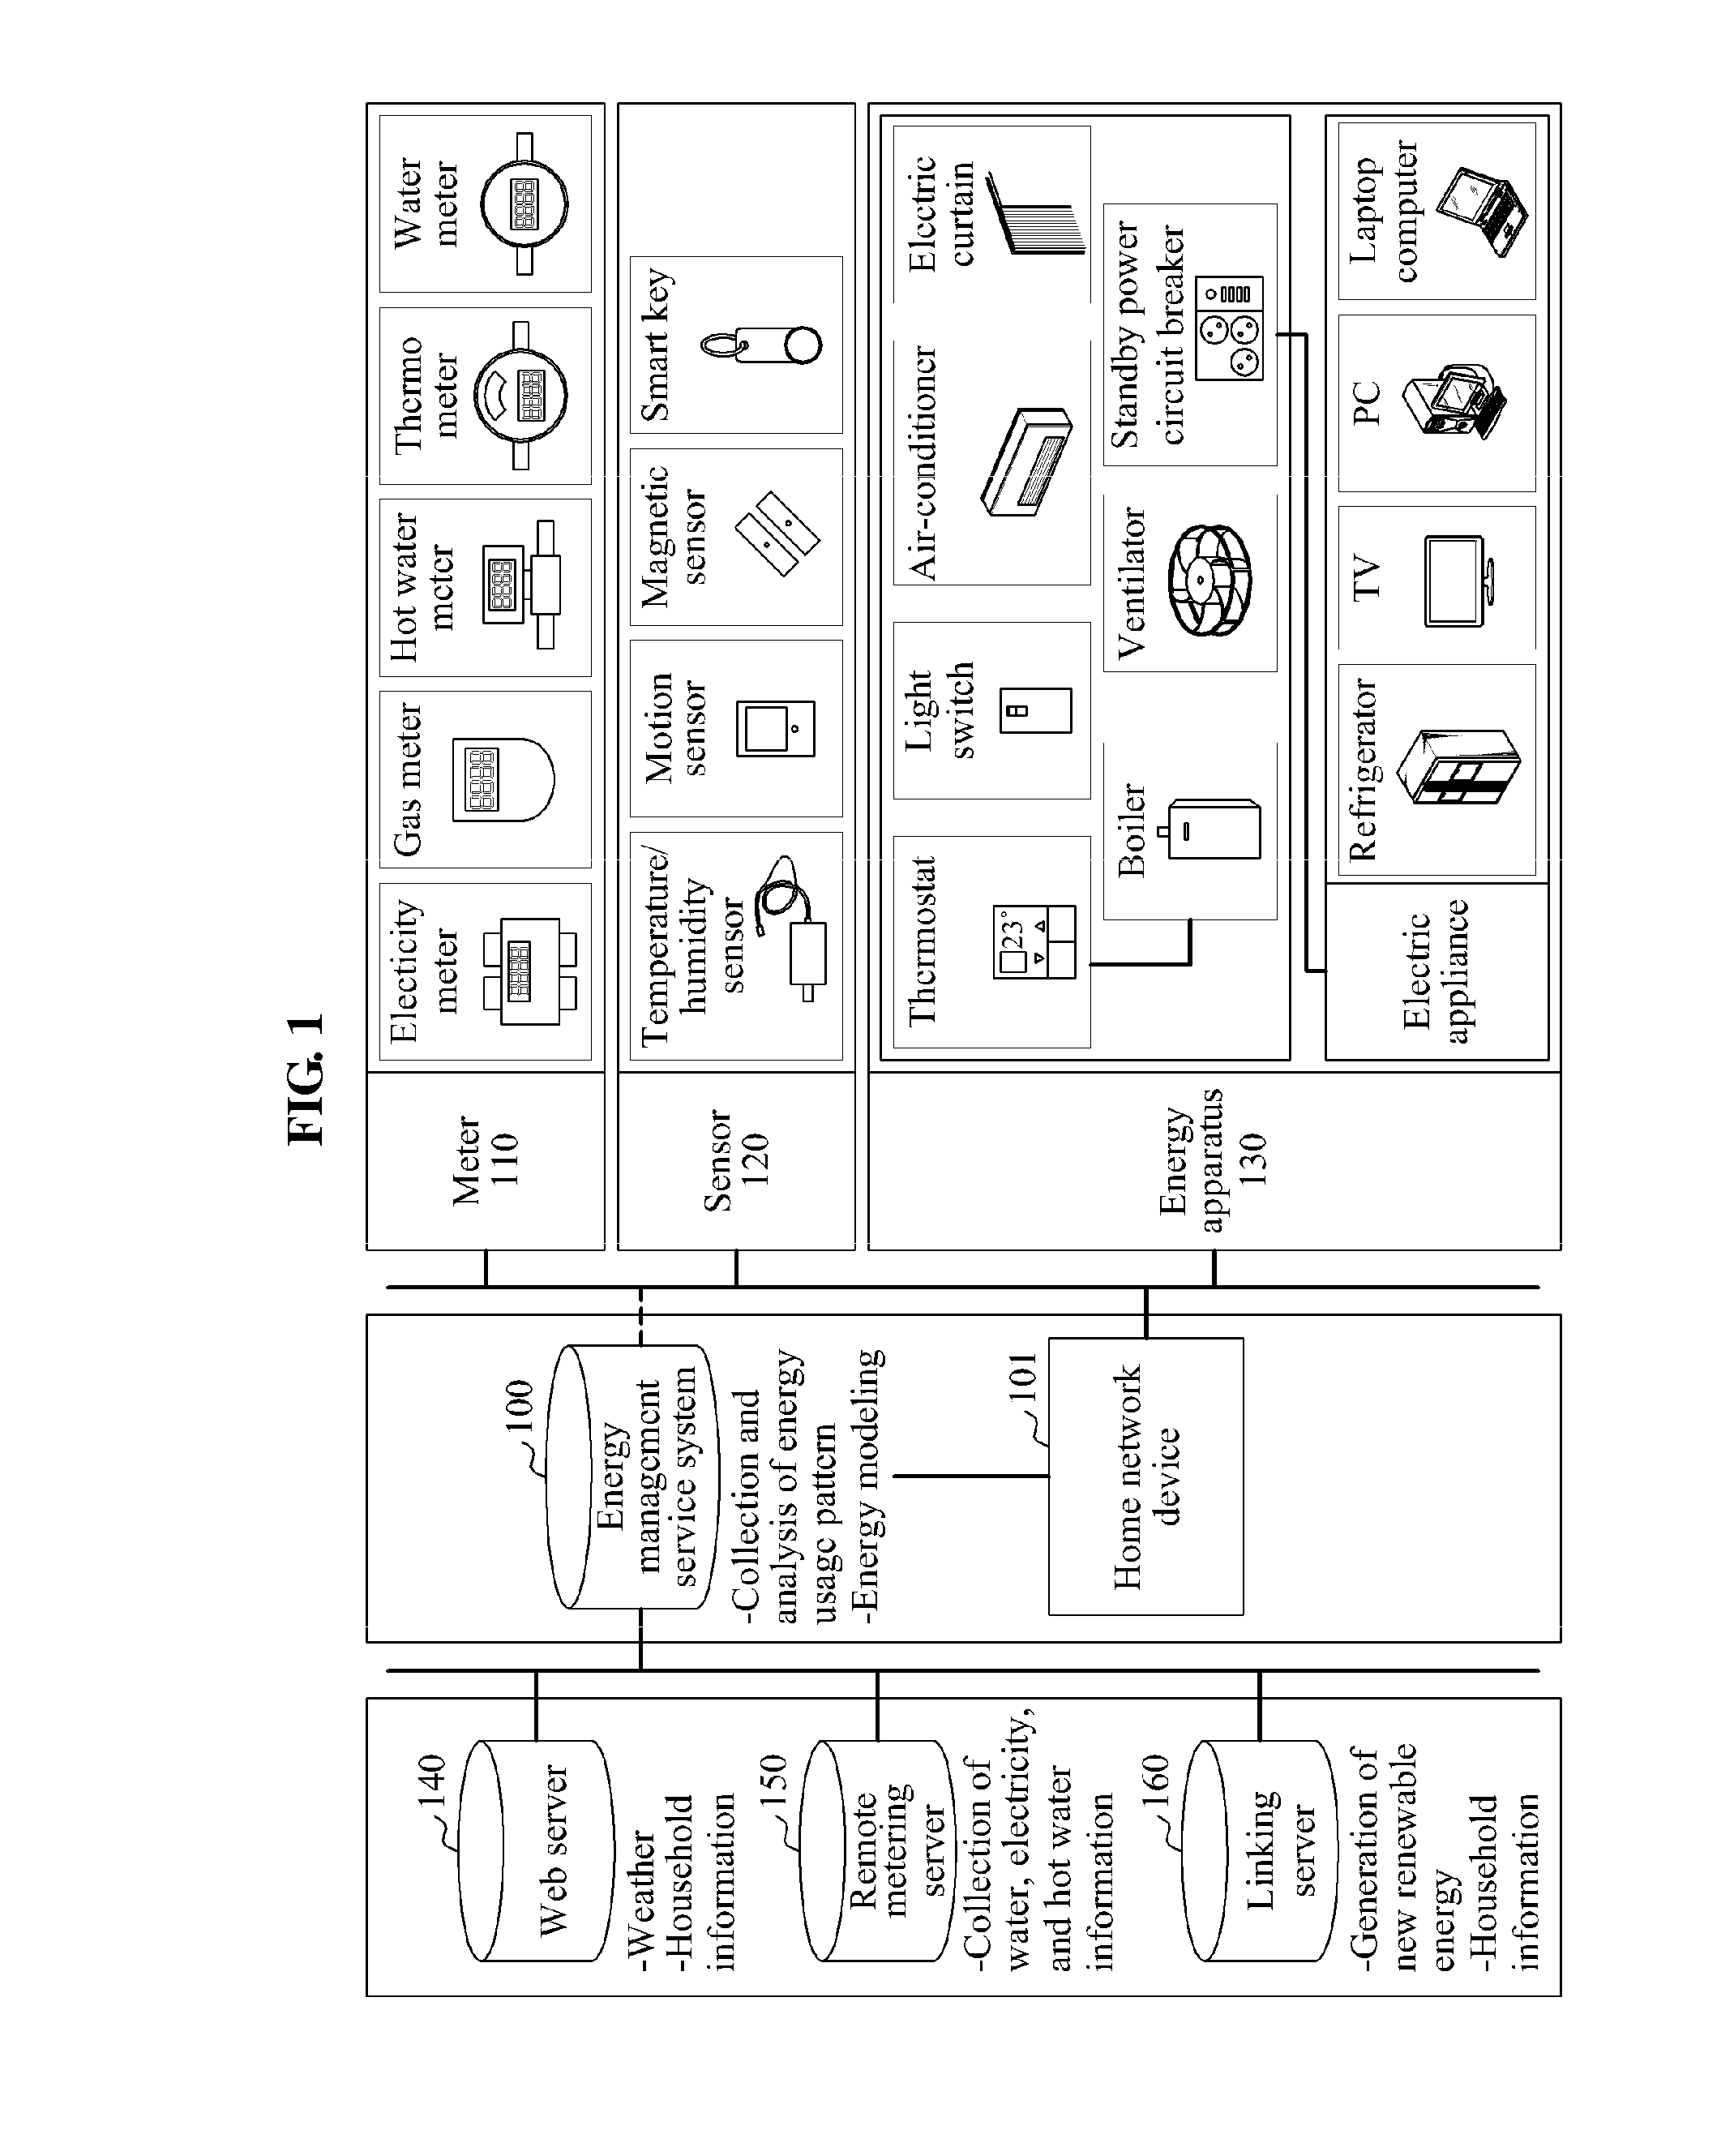 System and method for automatically controlling energy apparatus using energy modeling technique